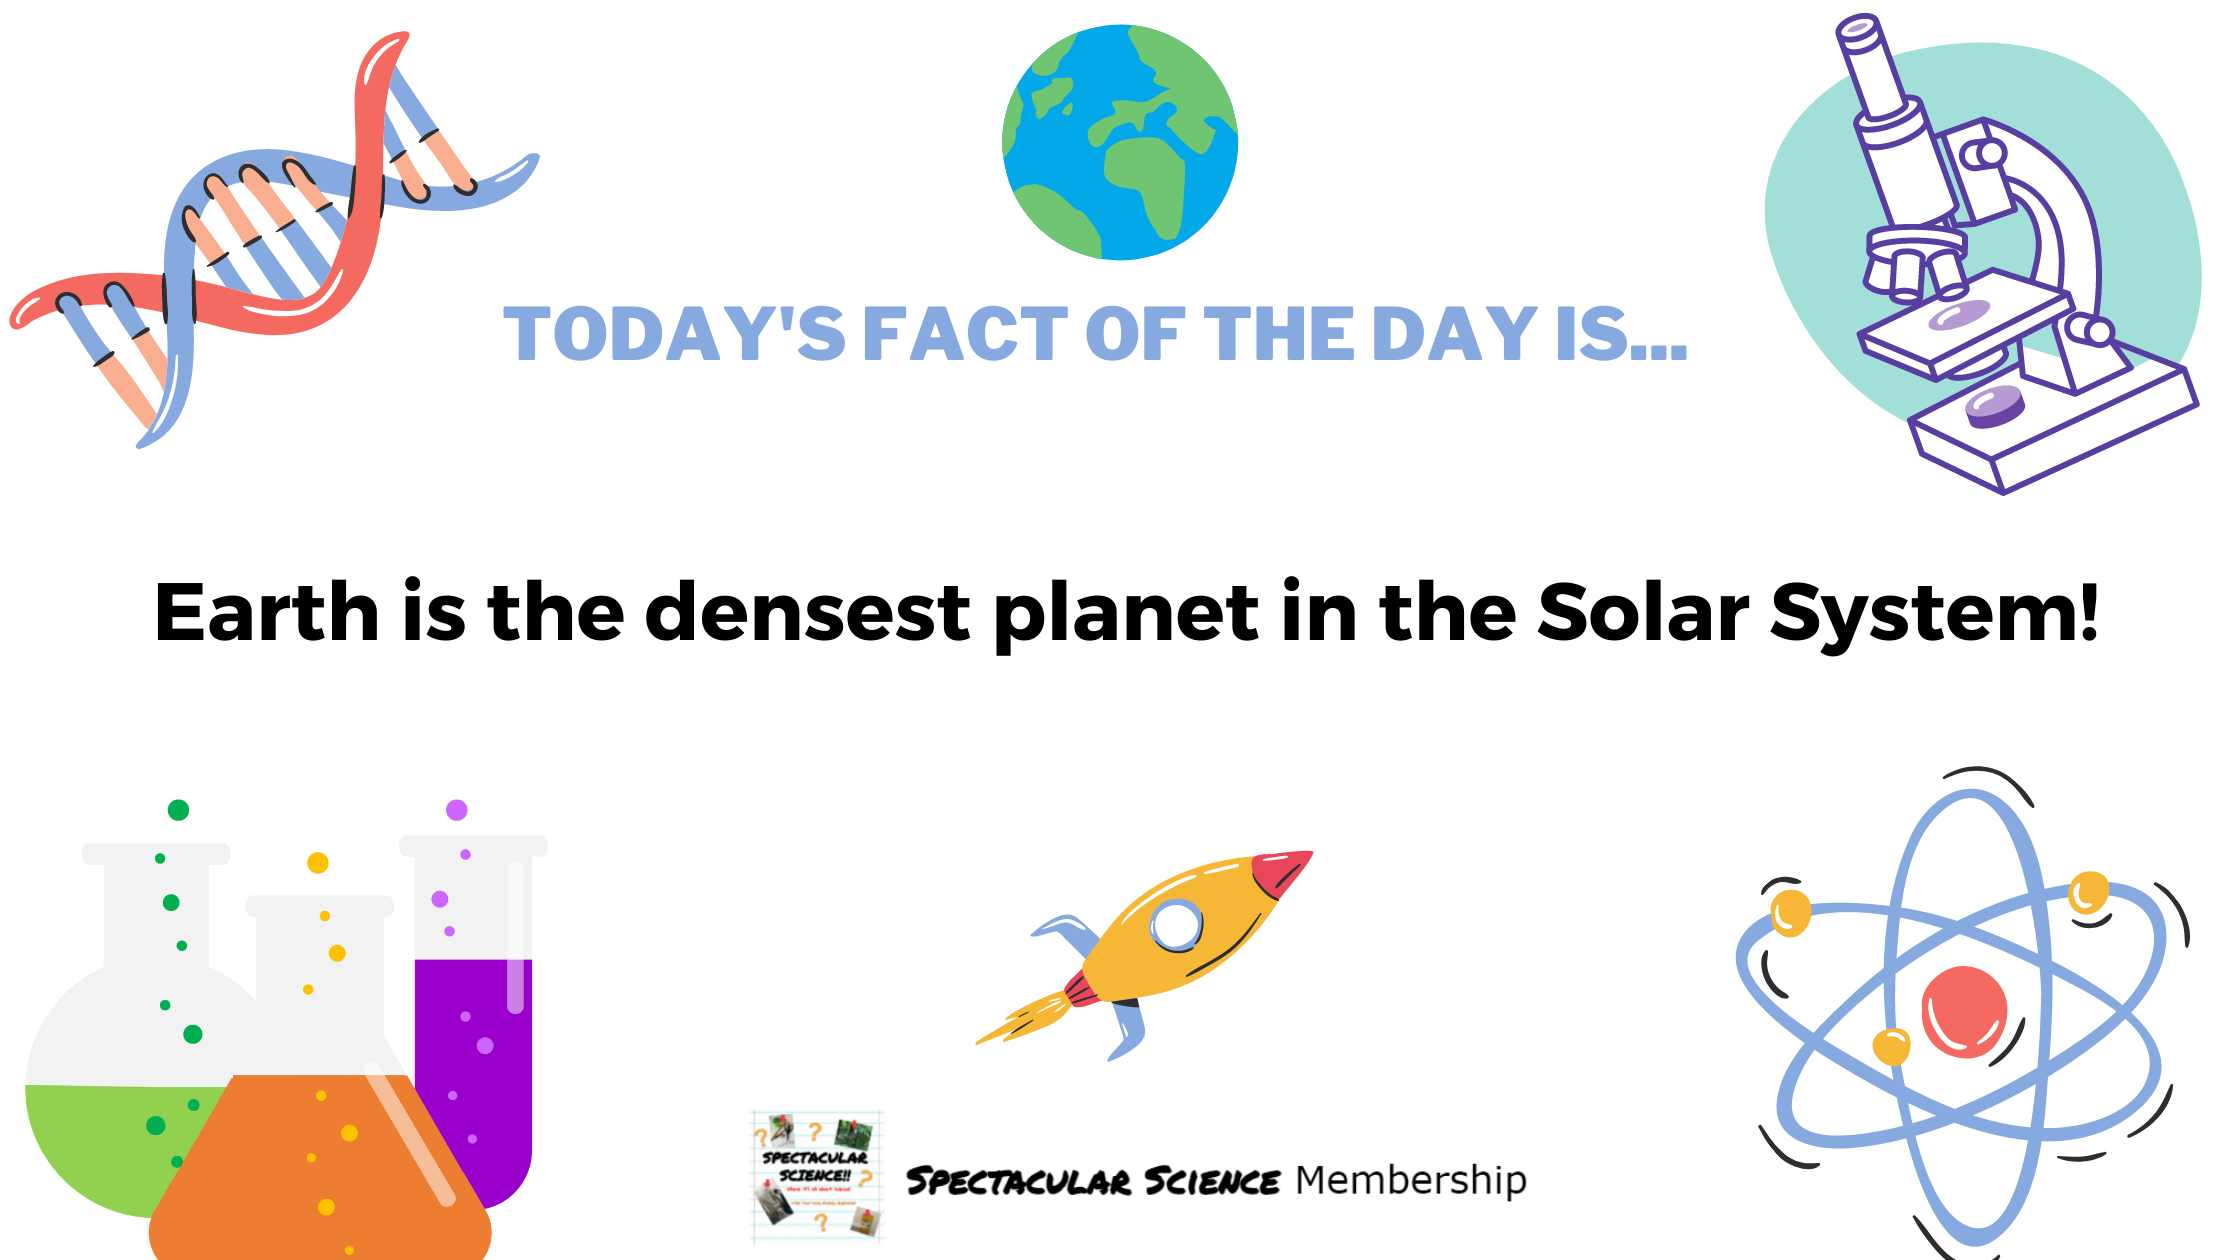 Fact of the Day Image Dec. 16th